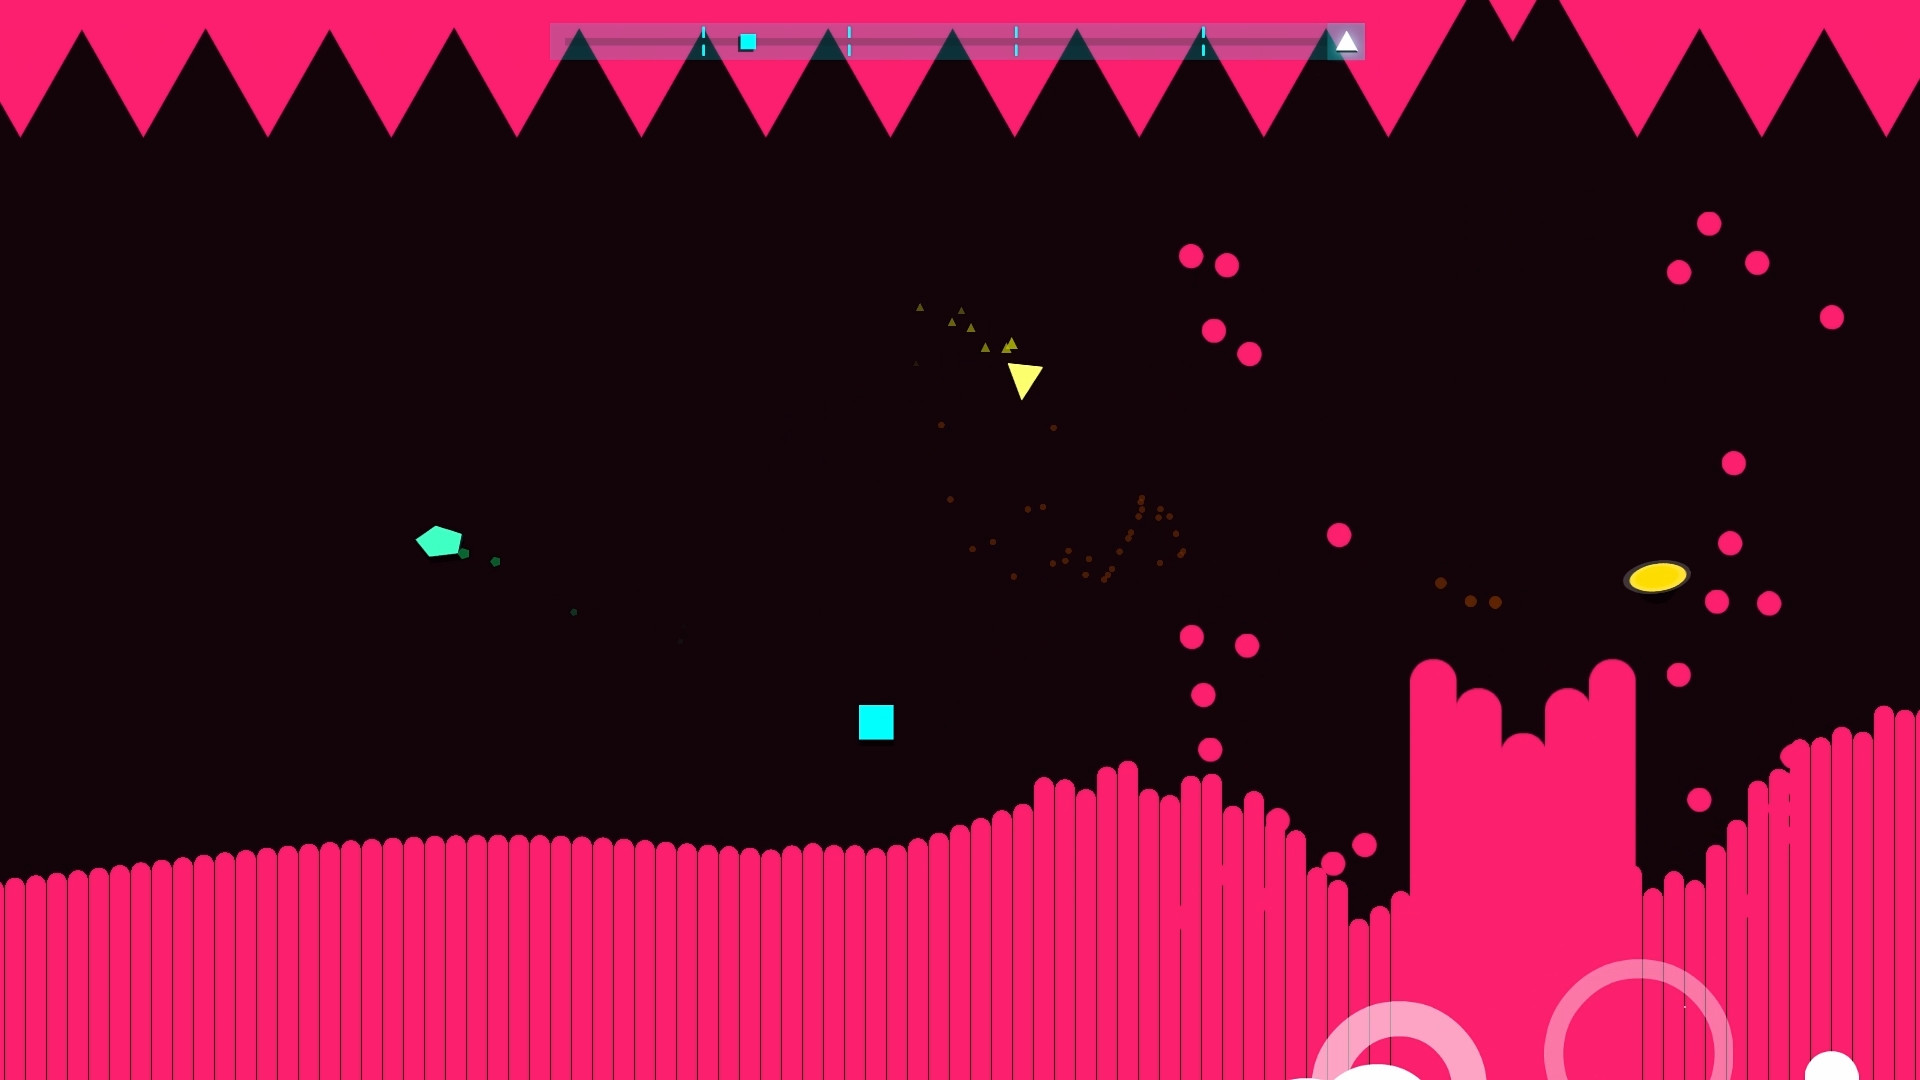 just shapes and beats android apk